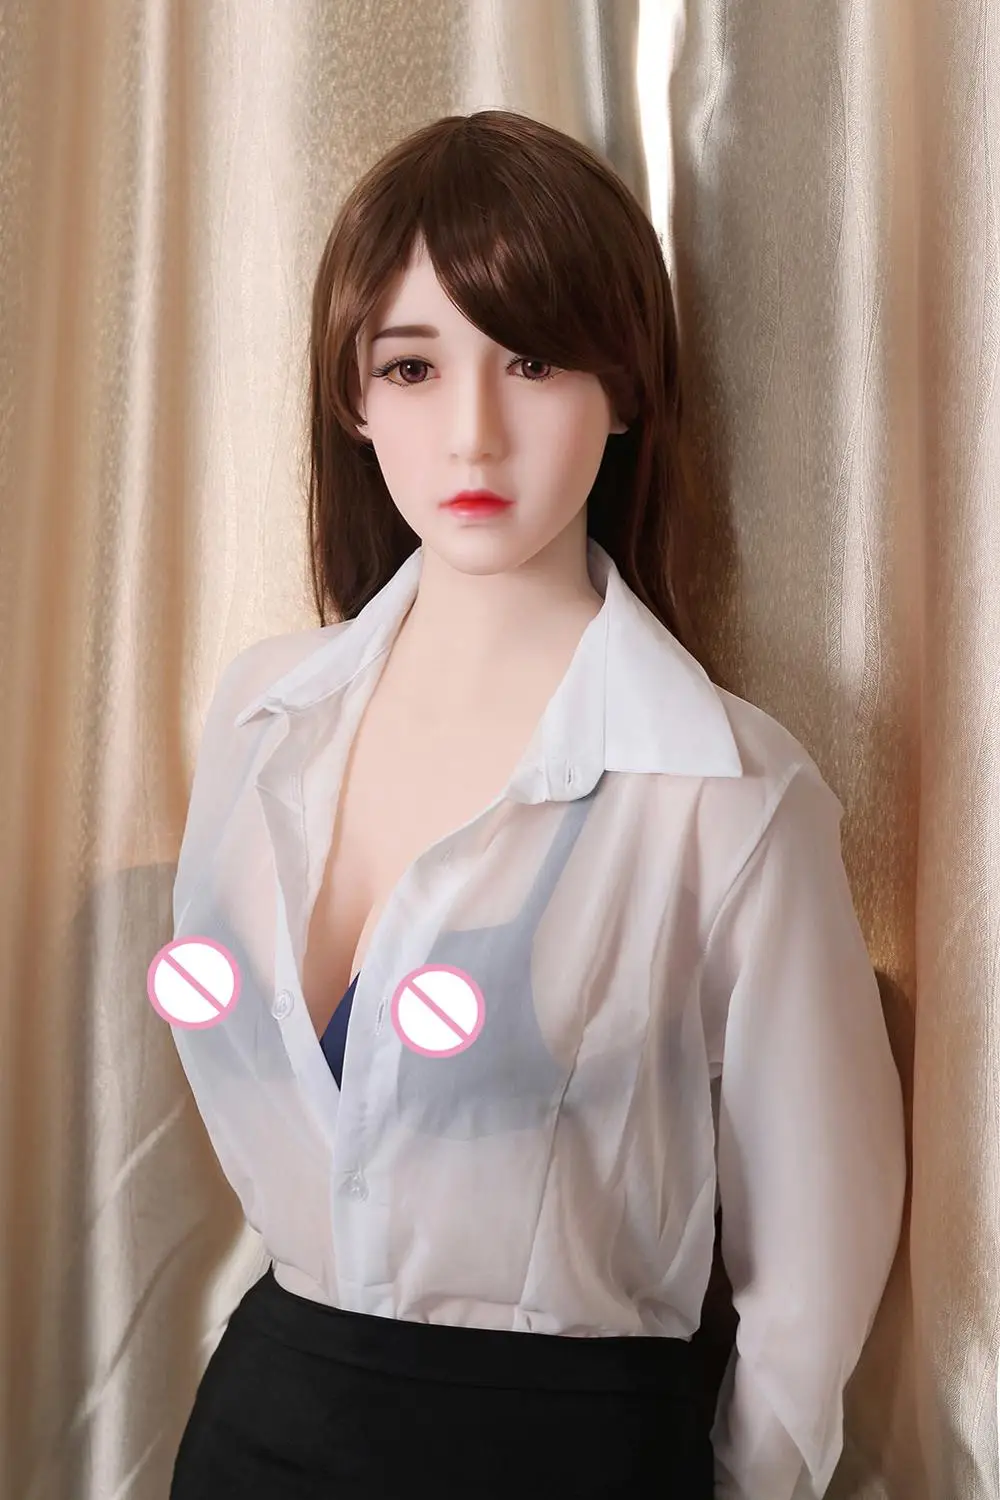 

165CM sex doll 30kg Torso Real TPE Sex Doll for Men Realistic Vagina Full Body Lifelike Huge Boobs Big Ass Adult Toys Sexual